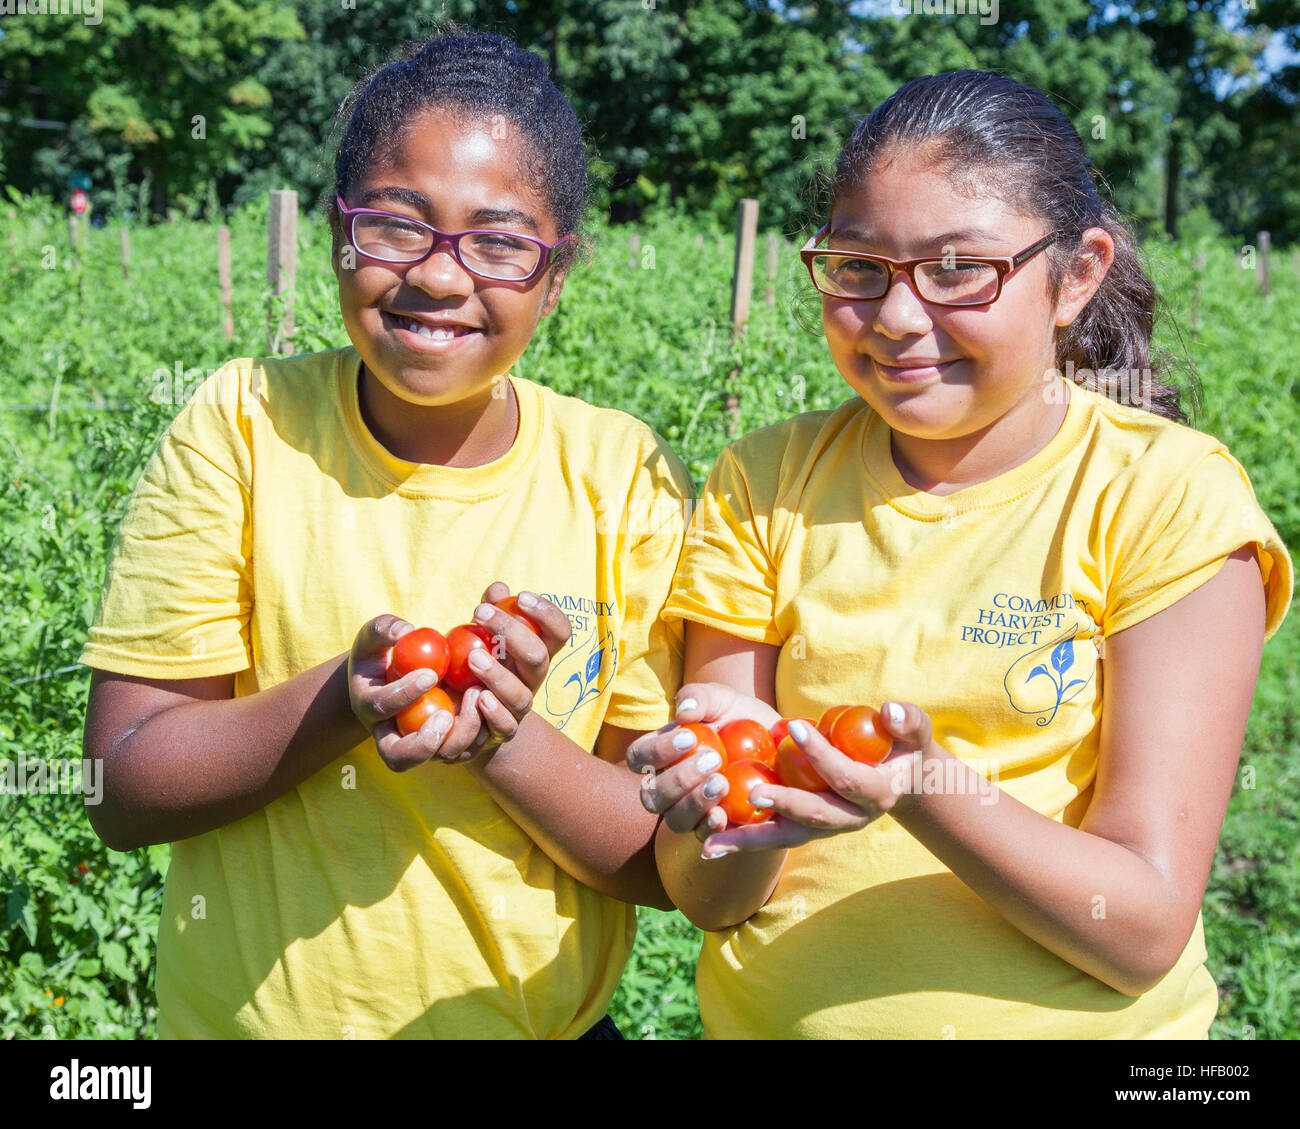 Girls holding tomatoes that they just picked Stock Photo